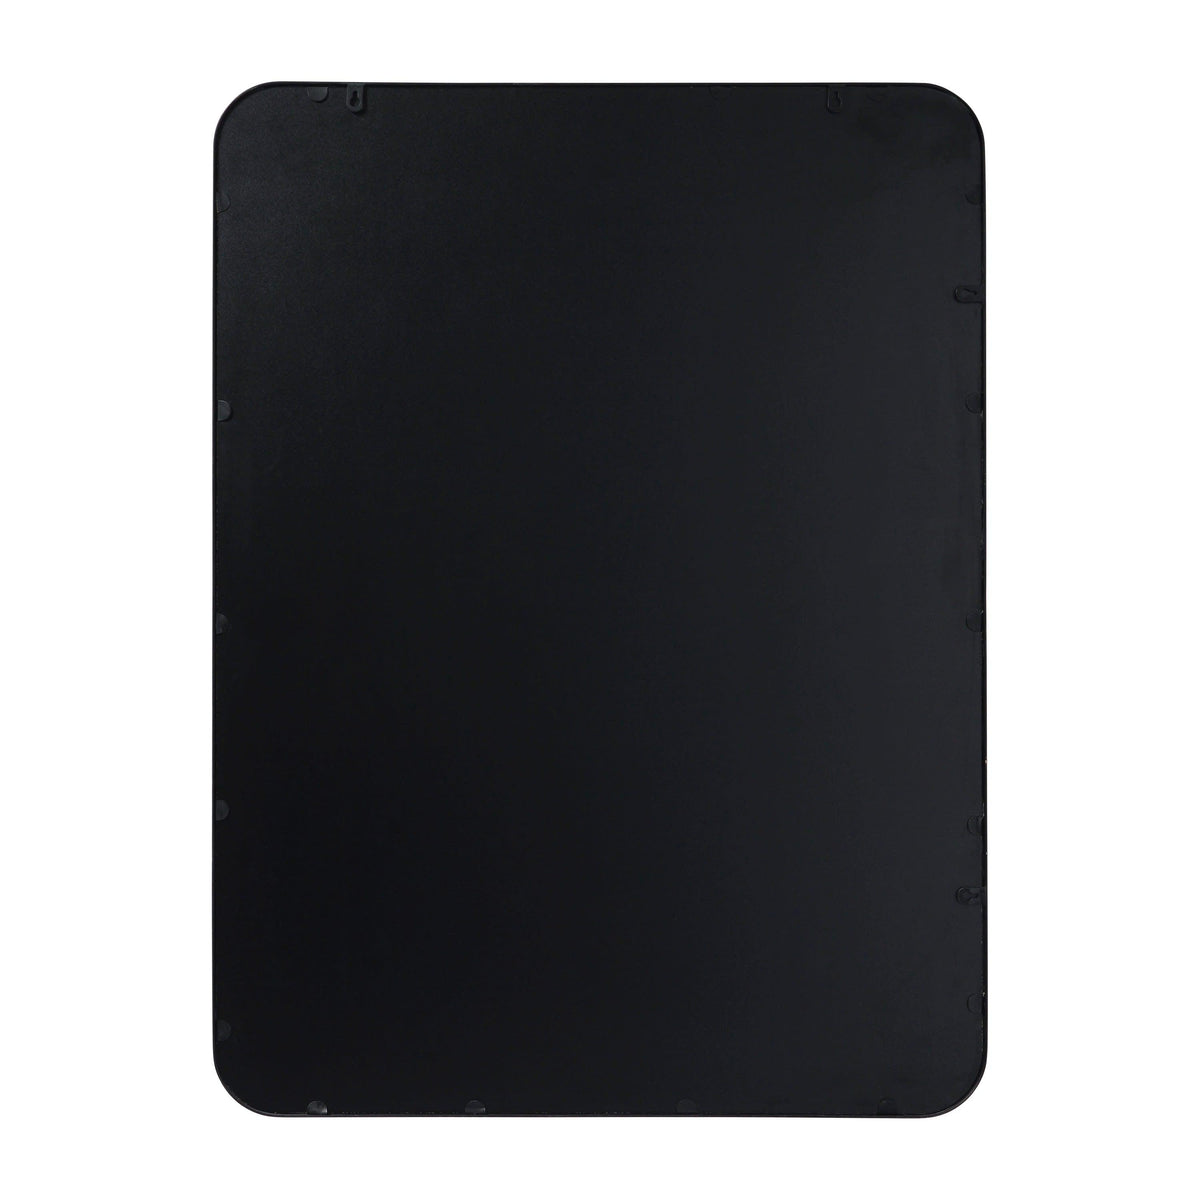 Matte Black,30"W x 40"L |#| Wall Mount 40x30 Accent Mirror with Matte Black Metal Frame/Silver Backed Glass